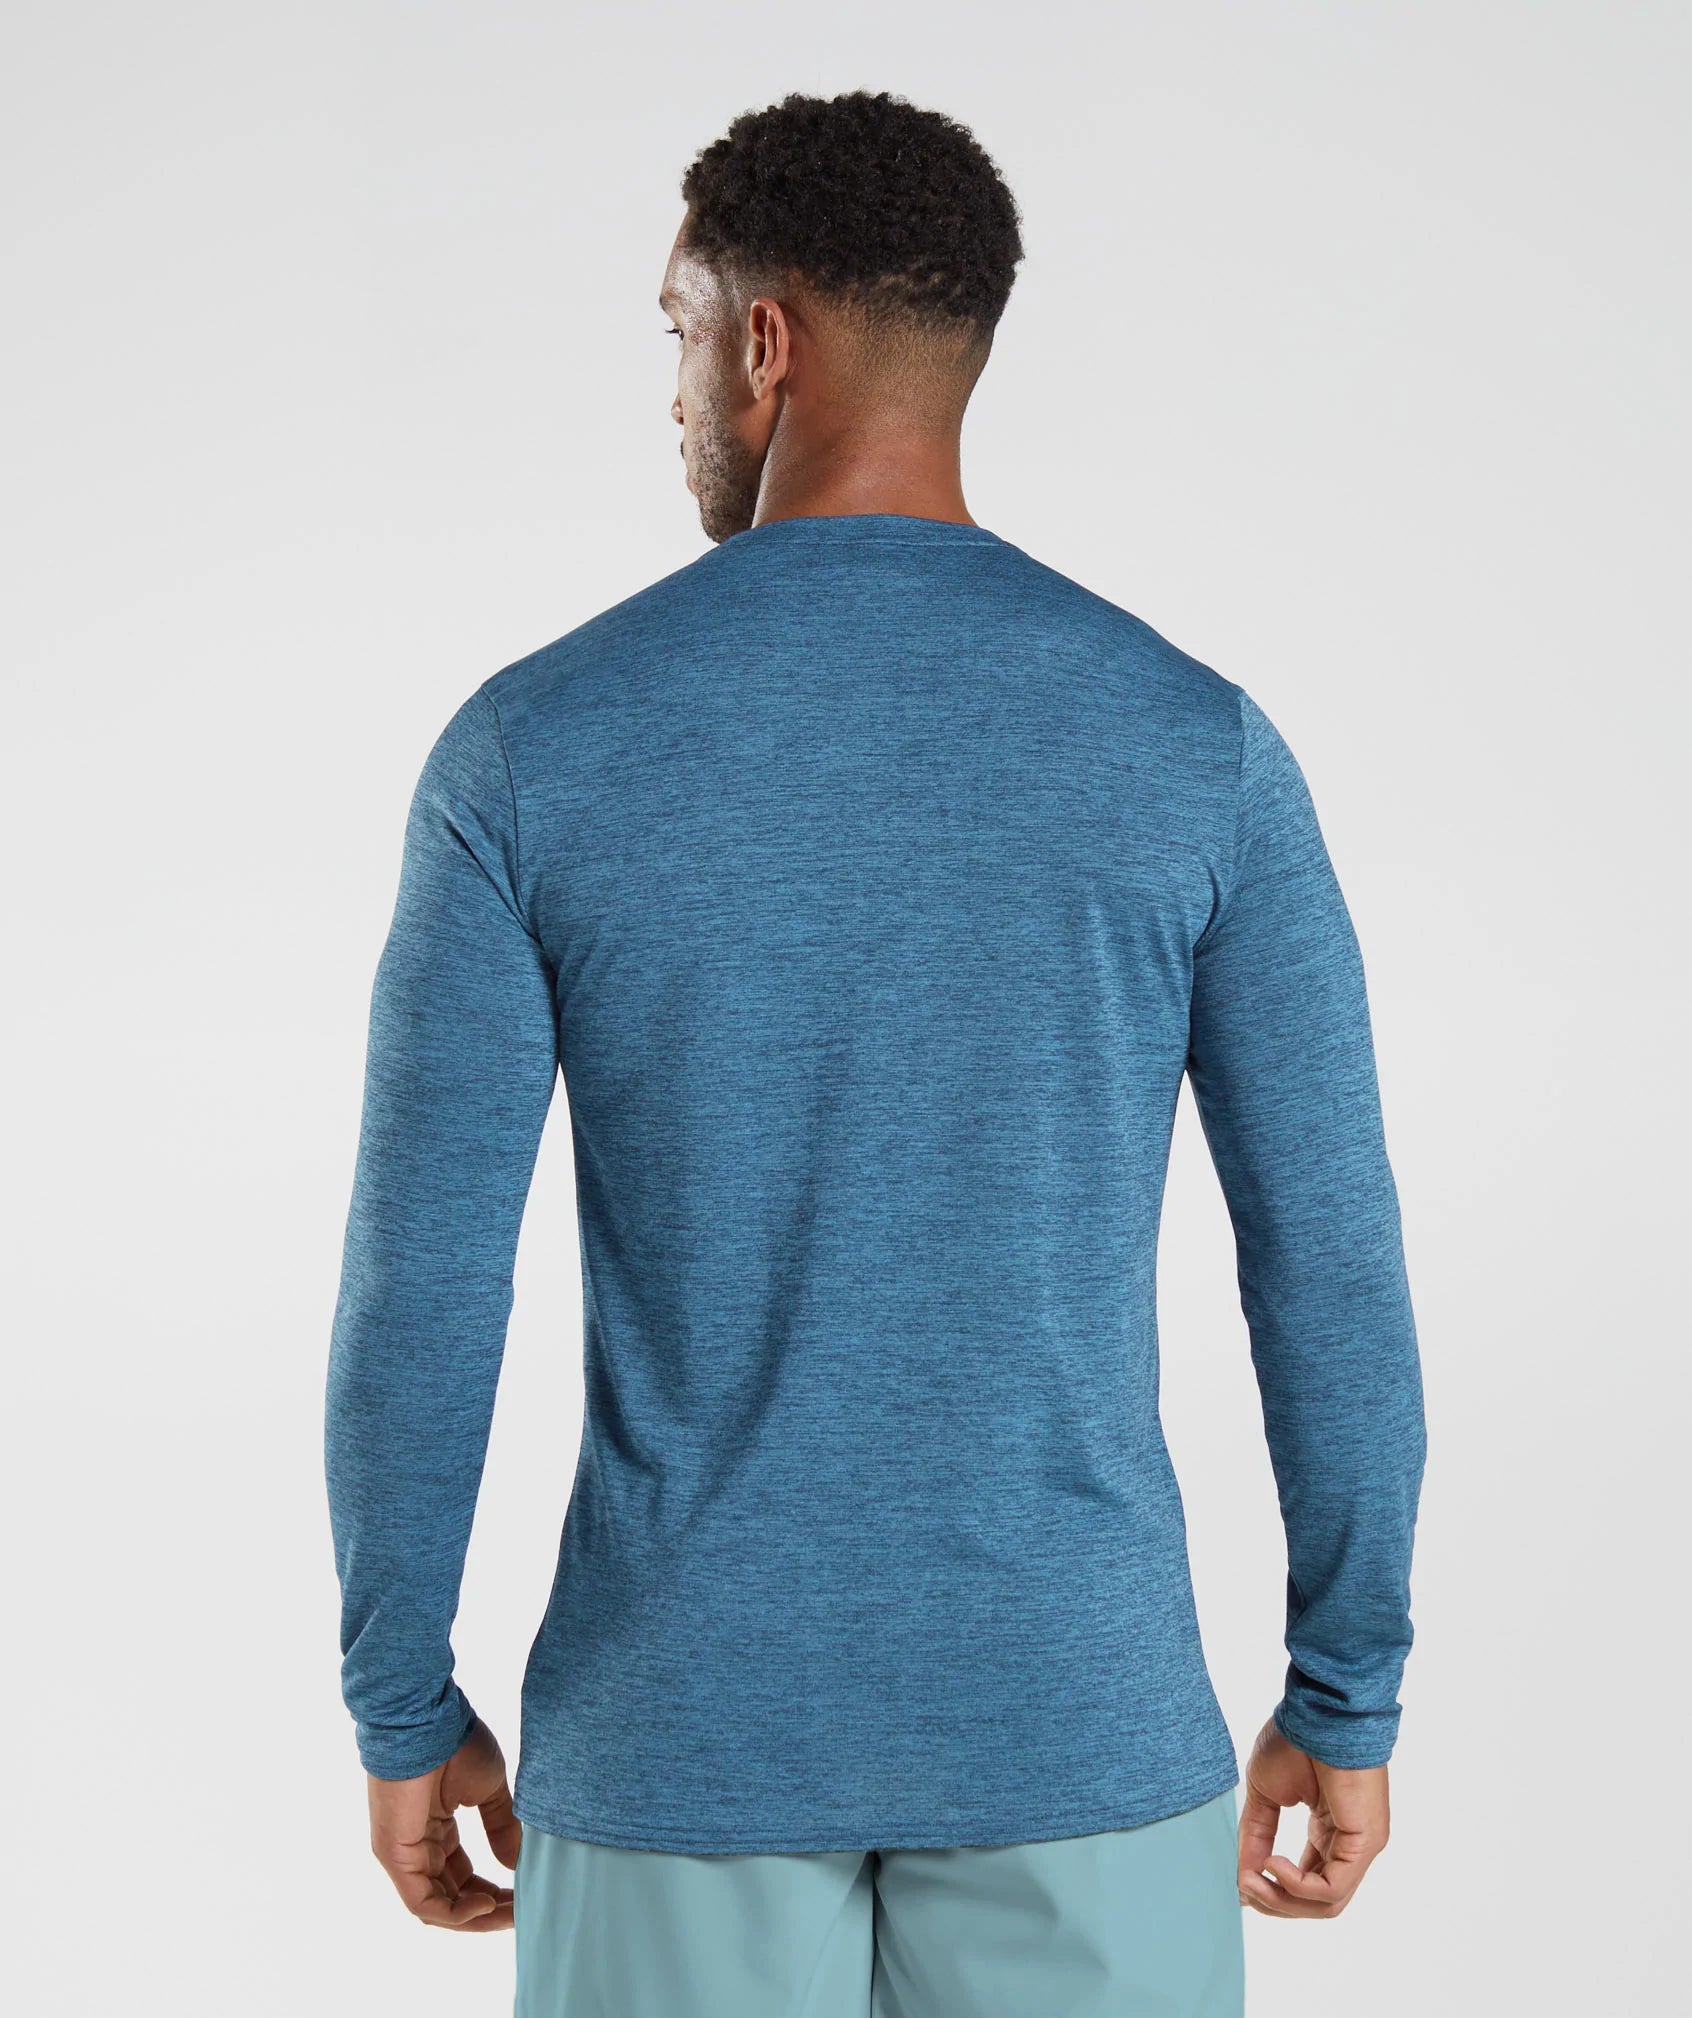 Arrival Marl Long Sleeve T-Shirt in Navy/Lakeside Blue Marl - view 3